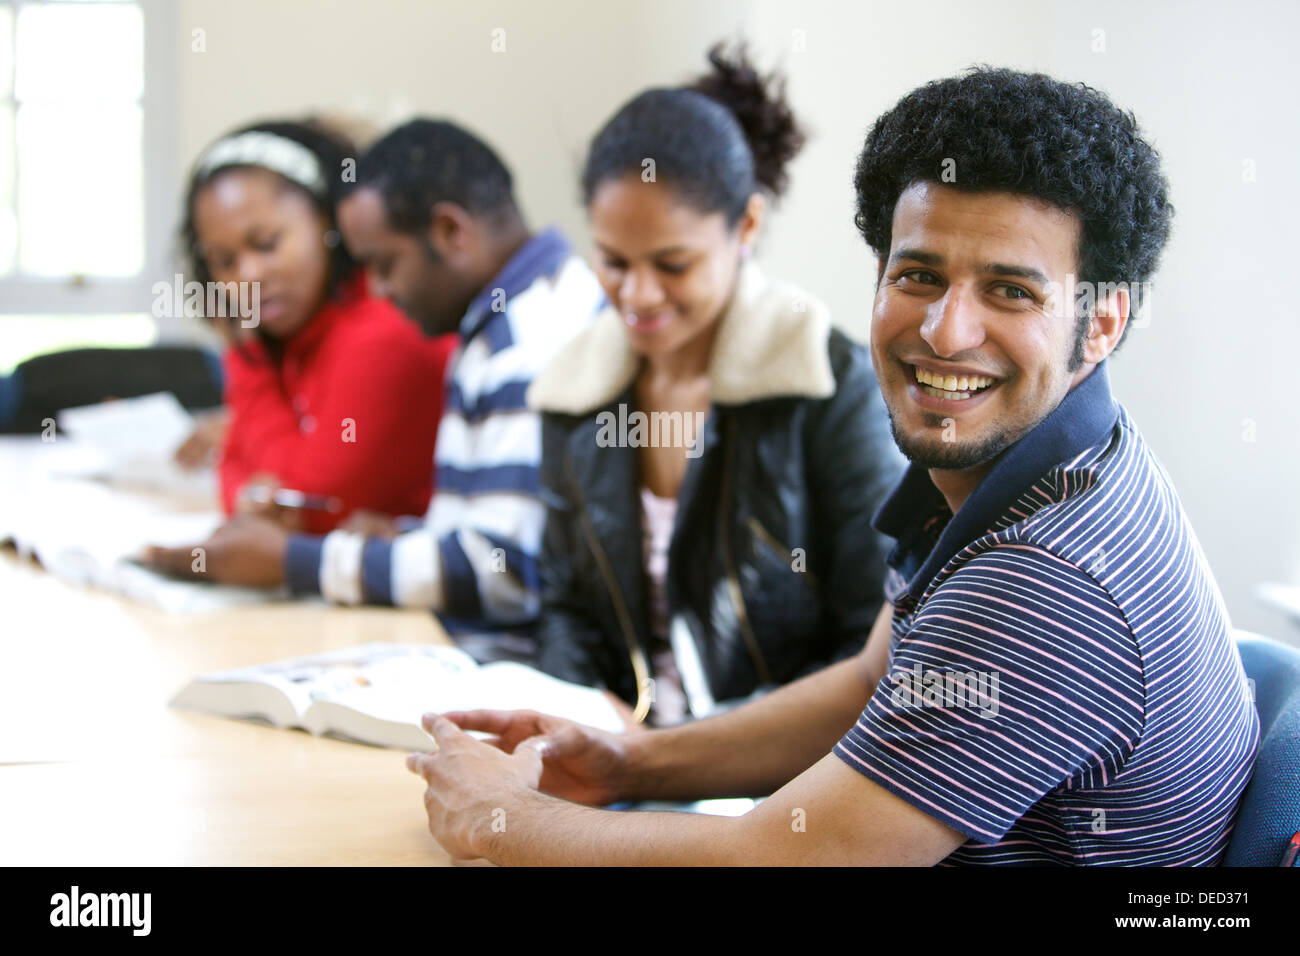 foreign students in classroom Stock Photo